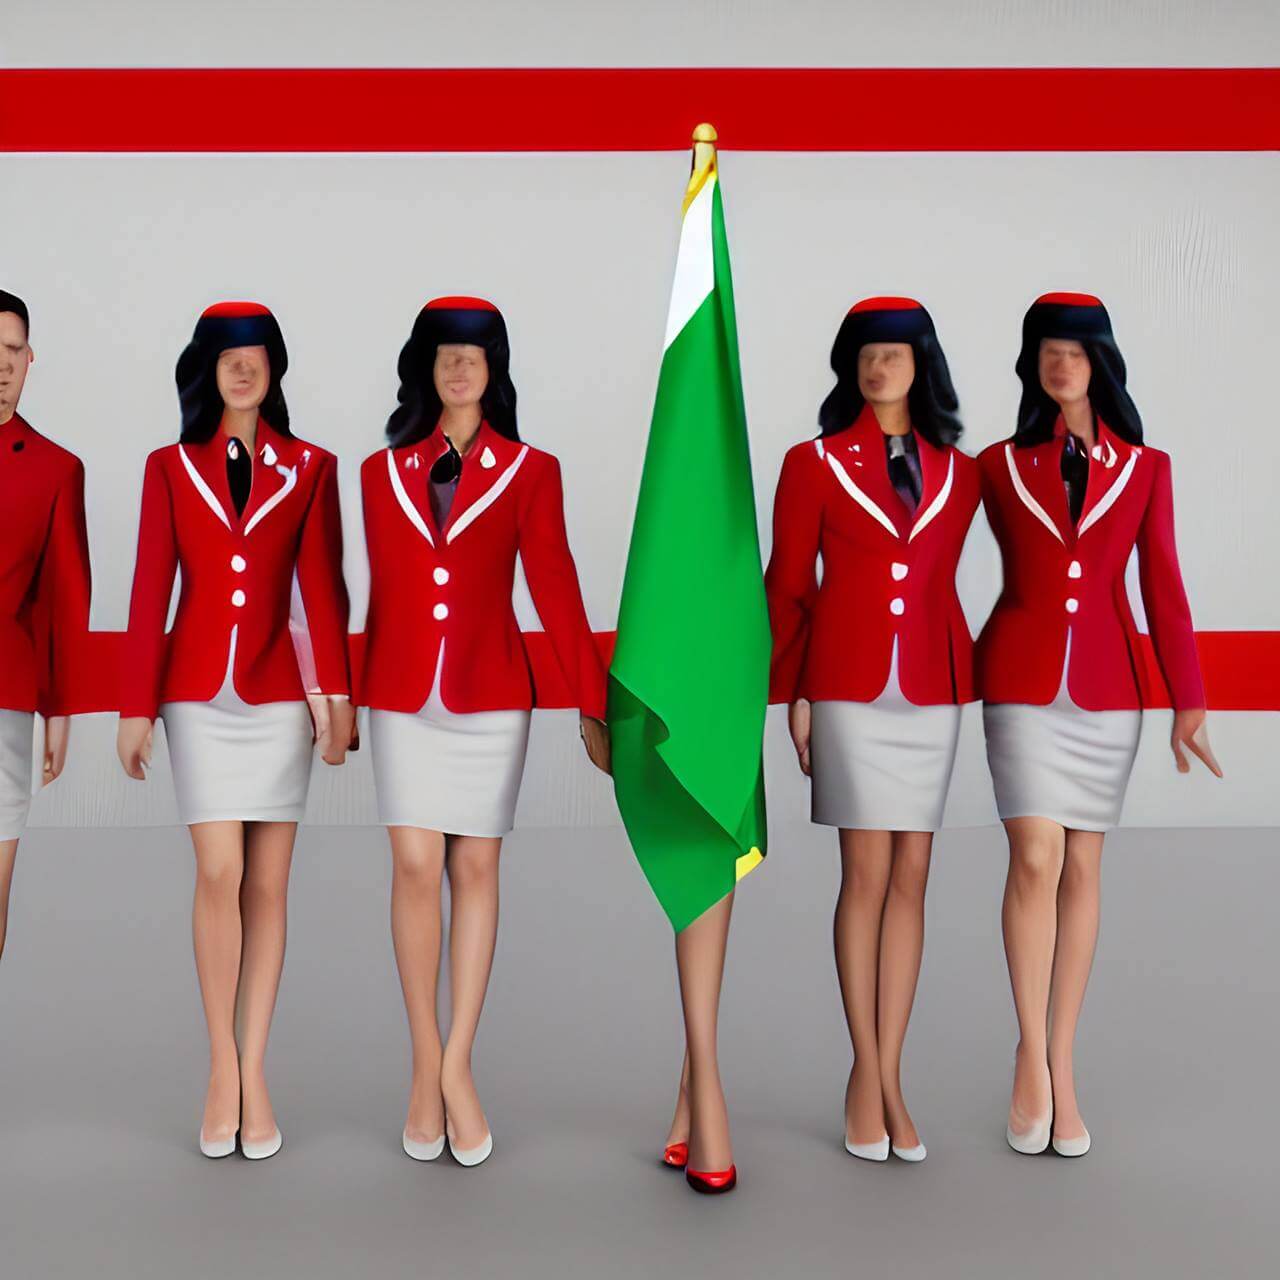 How to become a cabin crew in Hungary